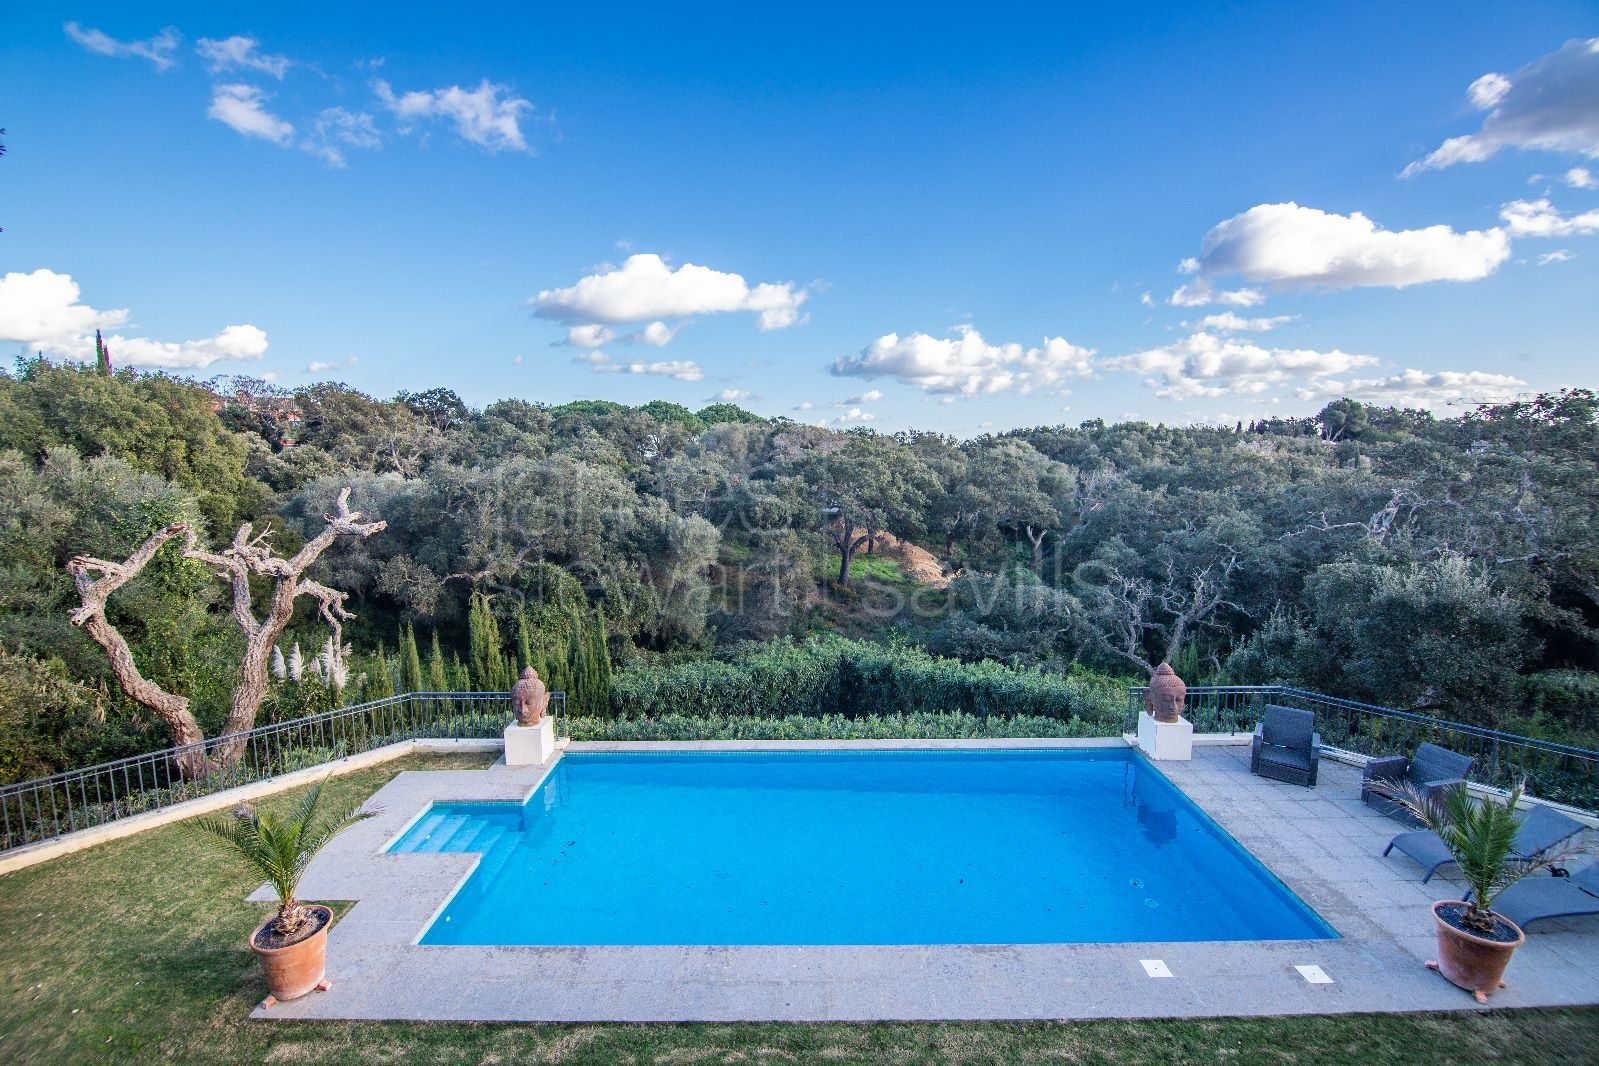 5 bedroom villa in an exclusive gated community within Sotogrande